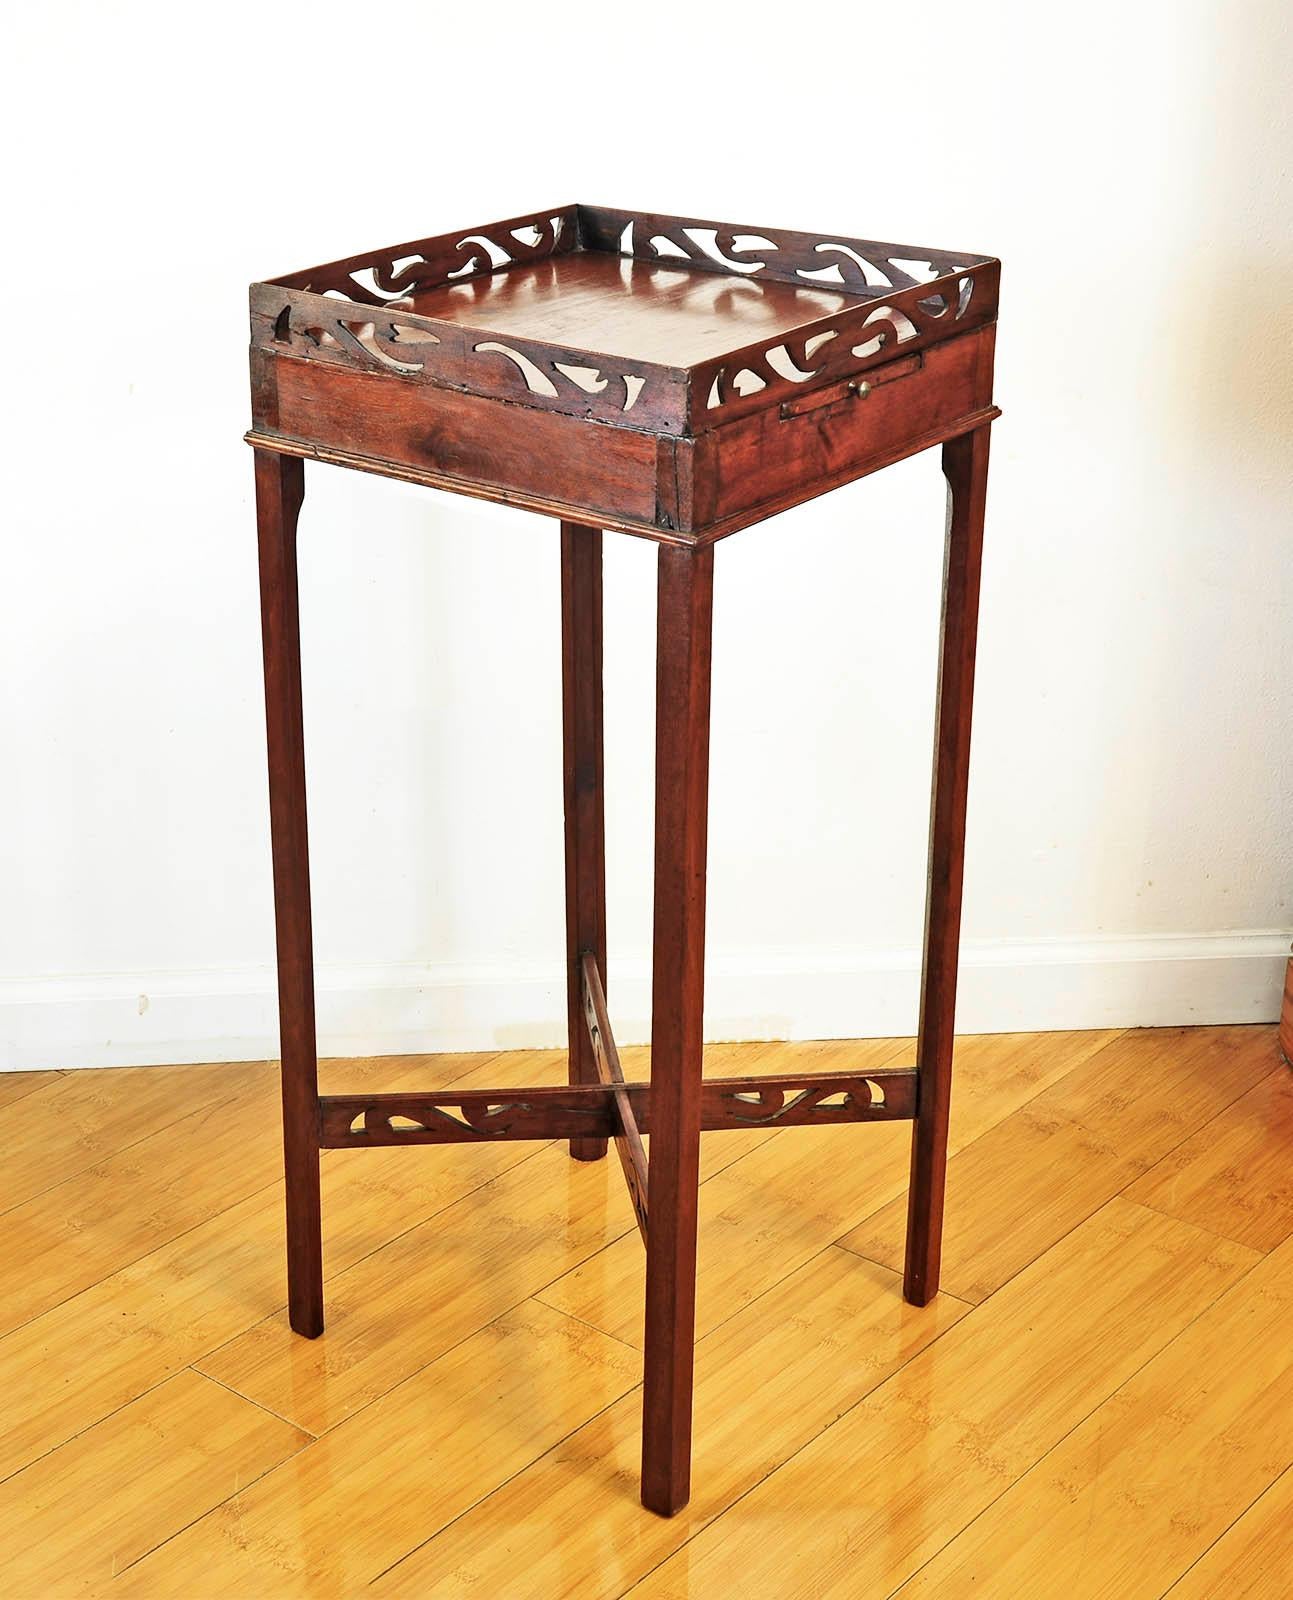 18th Century Antique English Chippendale Mahogany Urn Candle Stand Table For Sale 4